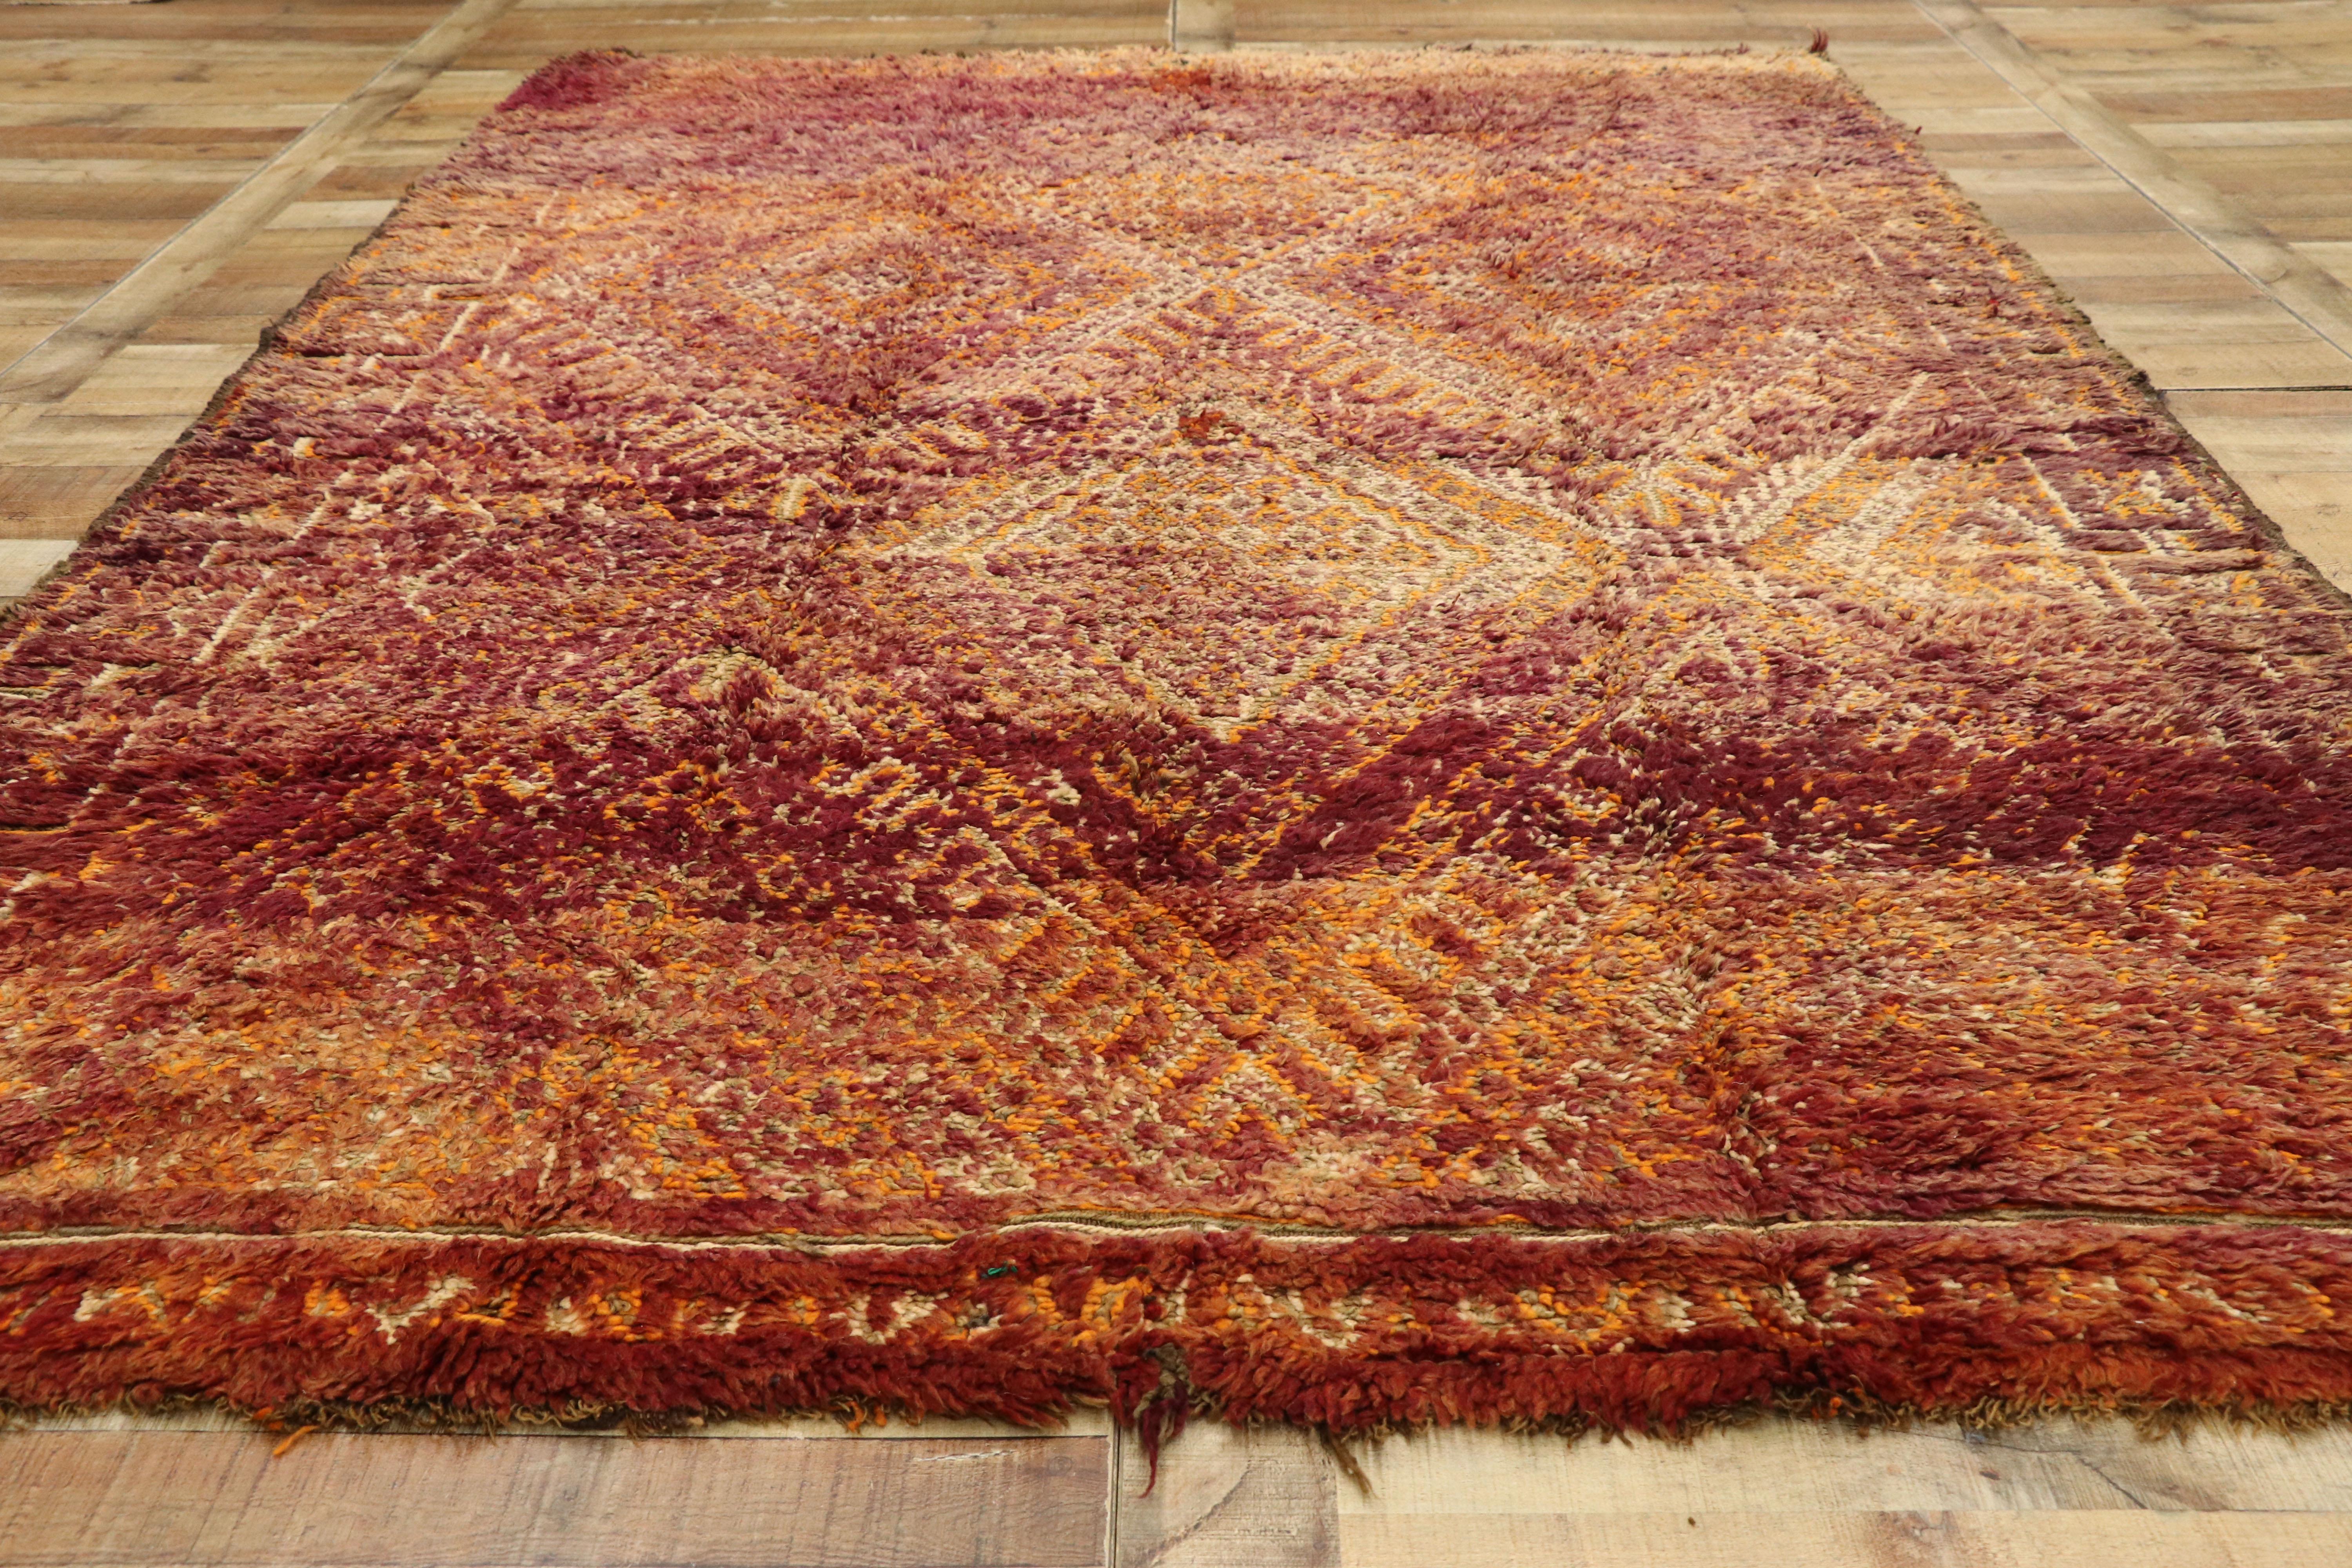 Wool Vintage Beni M'Guild Moroccan Rug with a Diamond Pattern in Warm, Spicy Hues